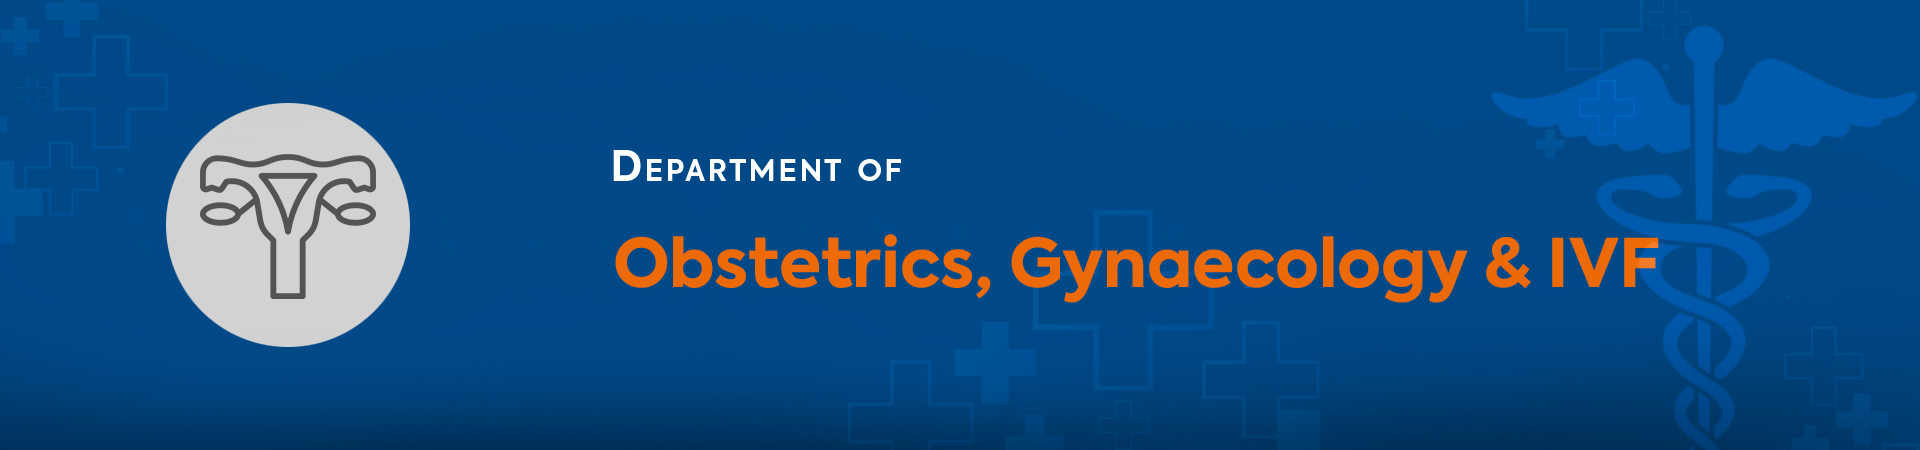 Obstetrics, Gynaecology and IVF